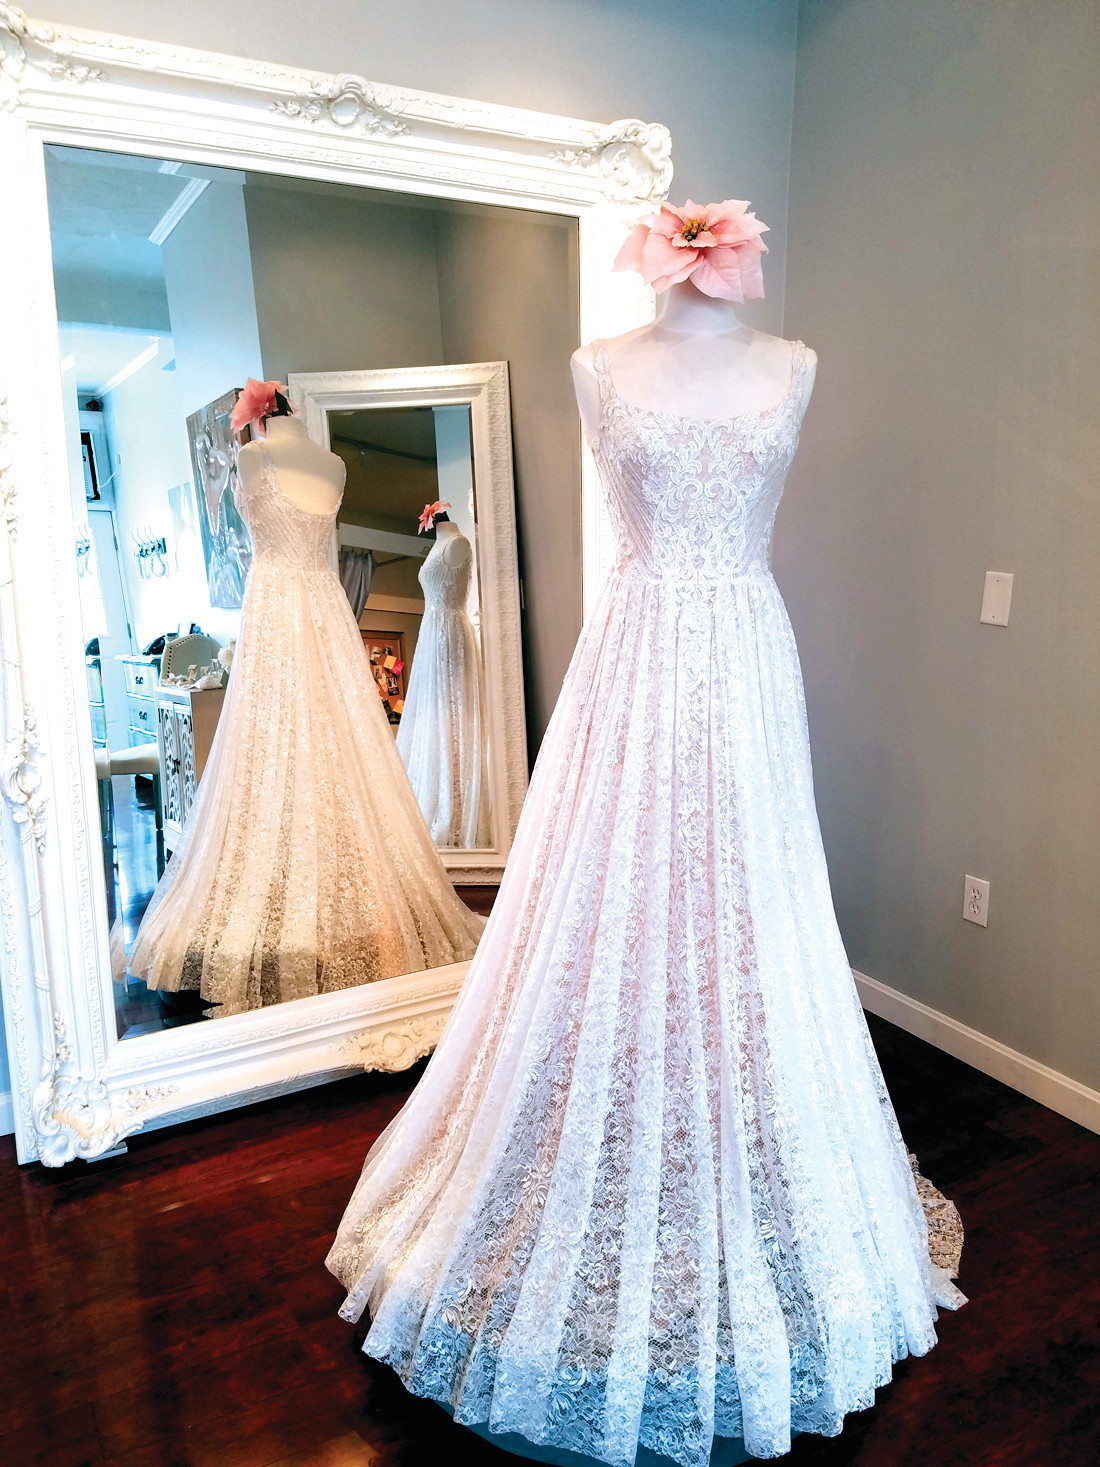 COMFORT FOR THE BRIDE: Spark Bridal Outlet on Cranston Street carries a 2017 Oksana Mukha design, a soft, flowing, and comfortable gown created from an ivory lace with a sheer cappuccino-colored underlay.